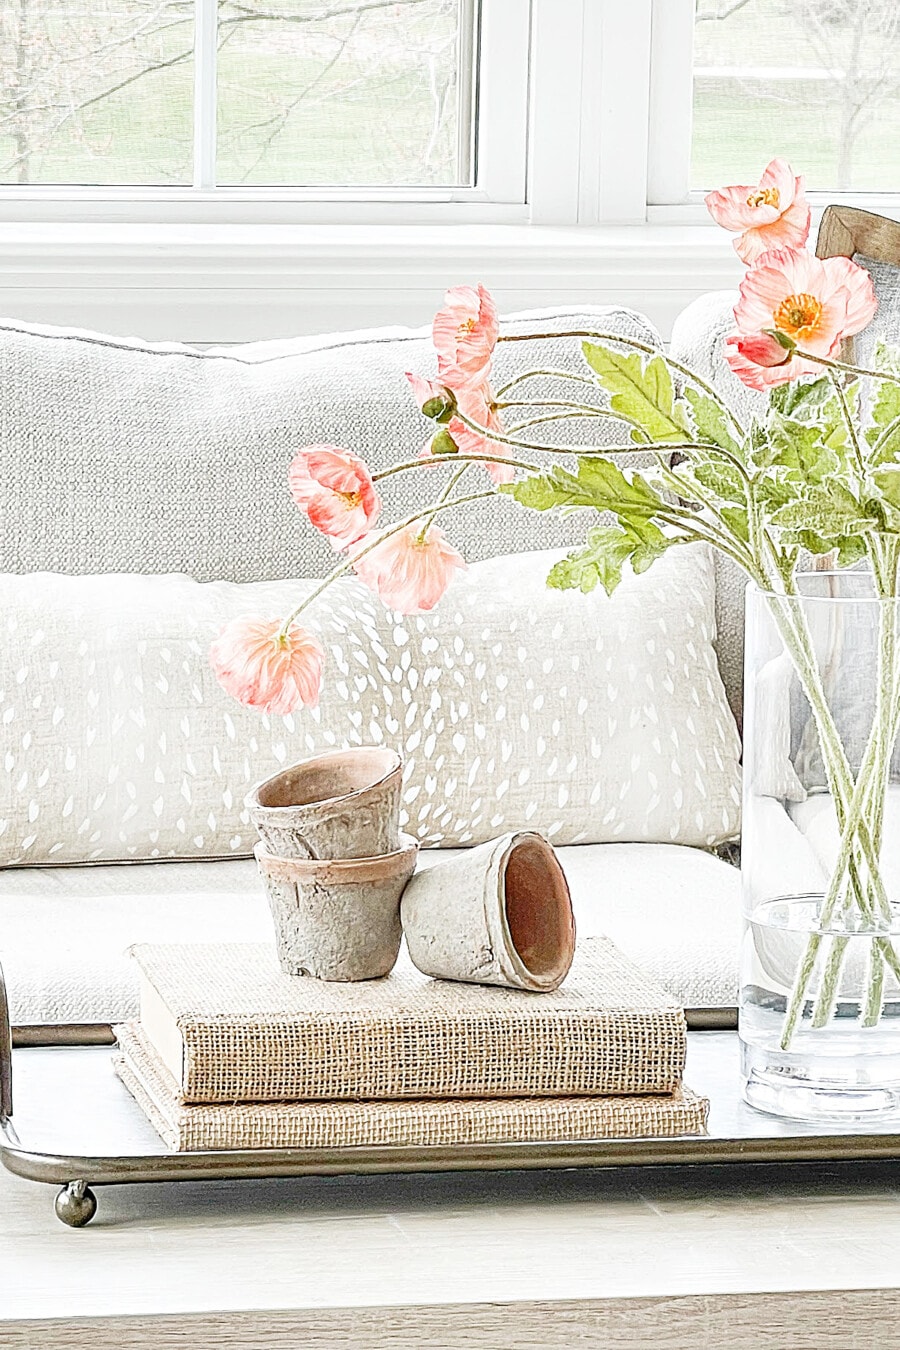 How To Decorate For Spring After Easter